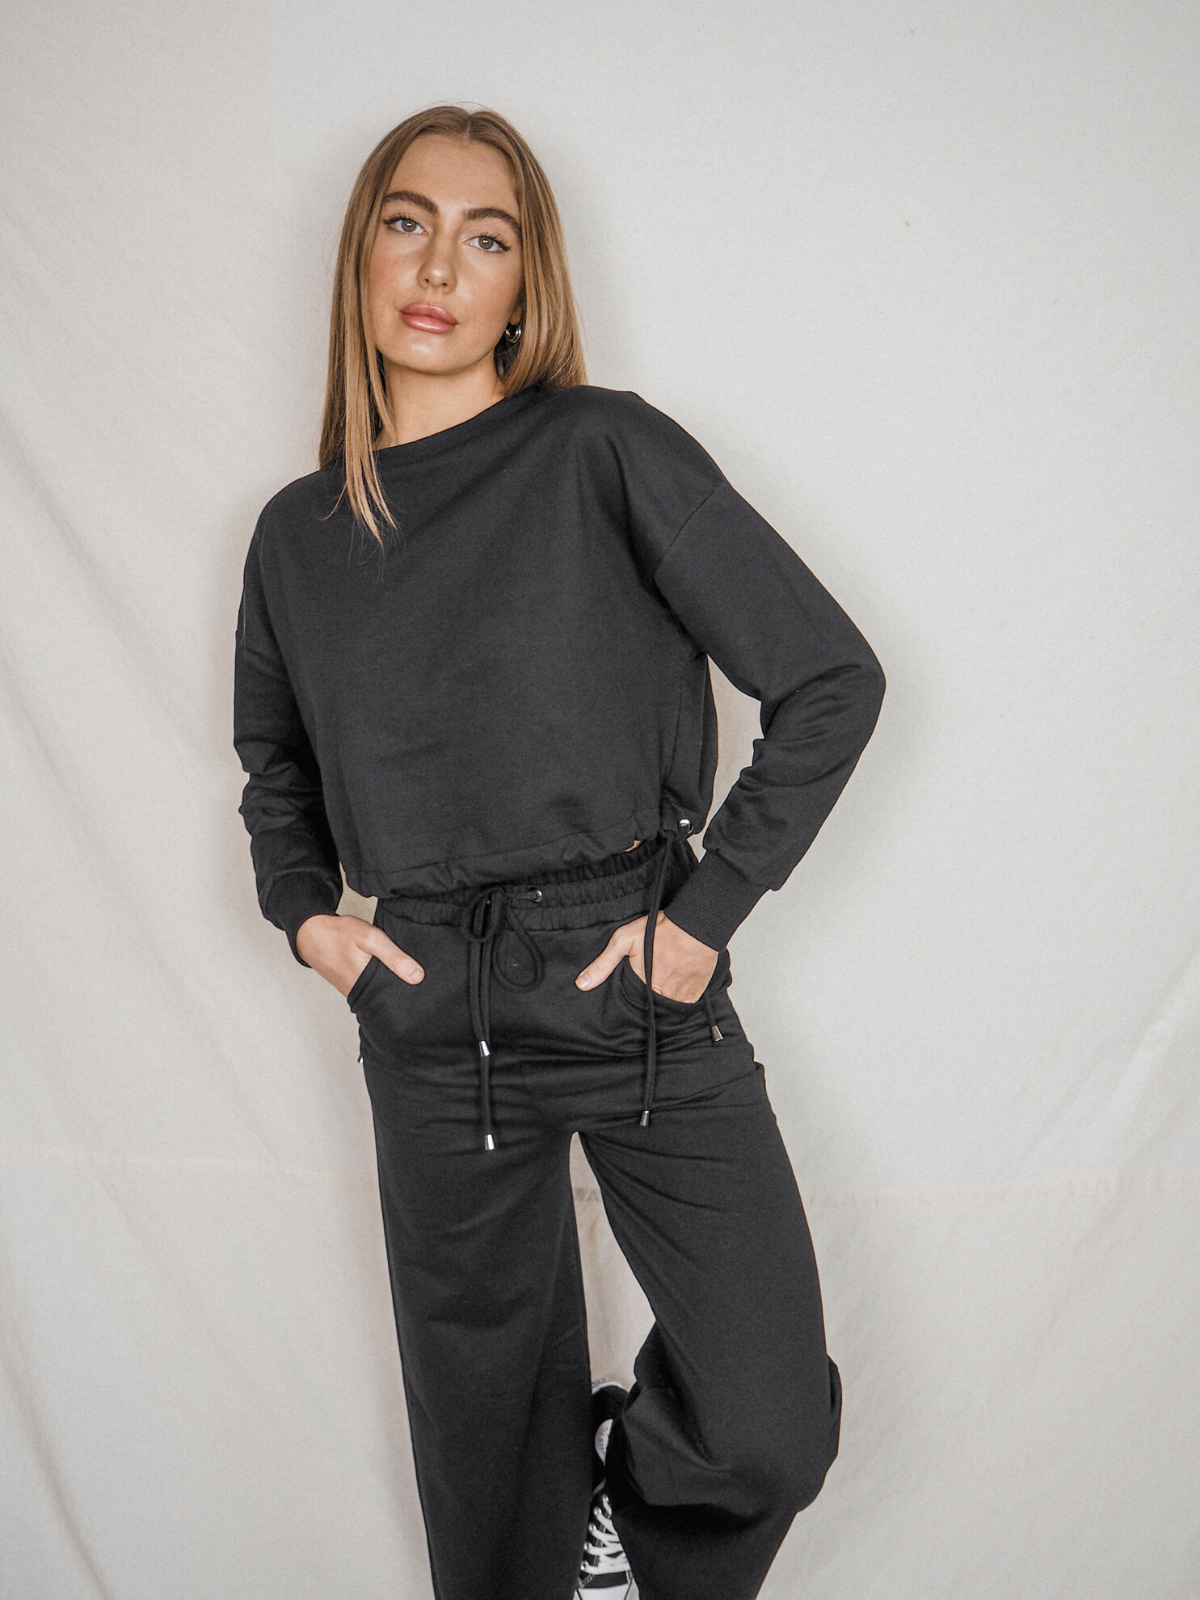 Principal Wide Leg Joggers in Washed Black